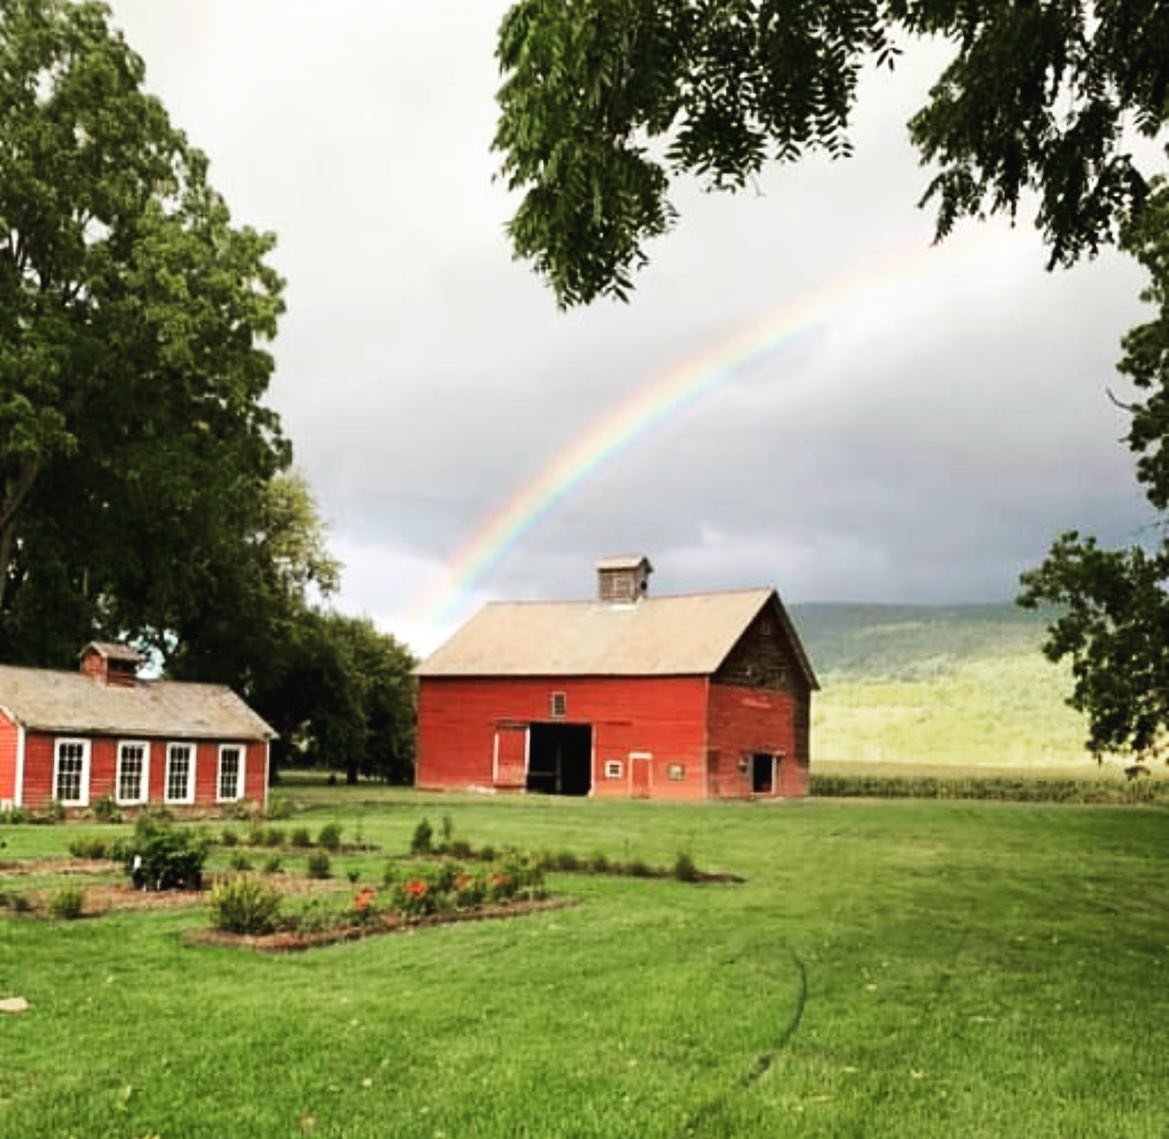 My favorite moment during the past few weeks. www.airbnb.com/p/Beekmanmansion  #americancountryhouse #cottagecore #upstateny #bedandbreakfast #catskills #greekrevival #airbnb #airbnbsuperhost